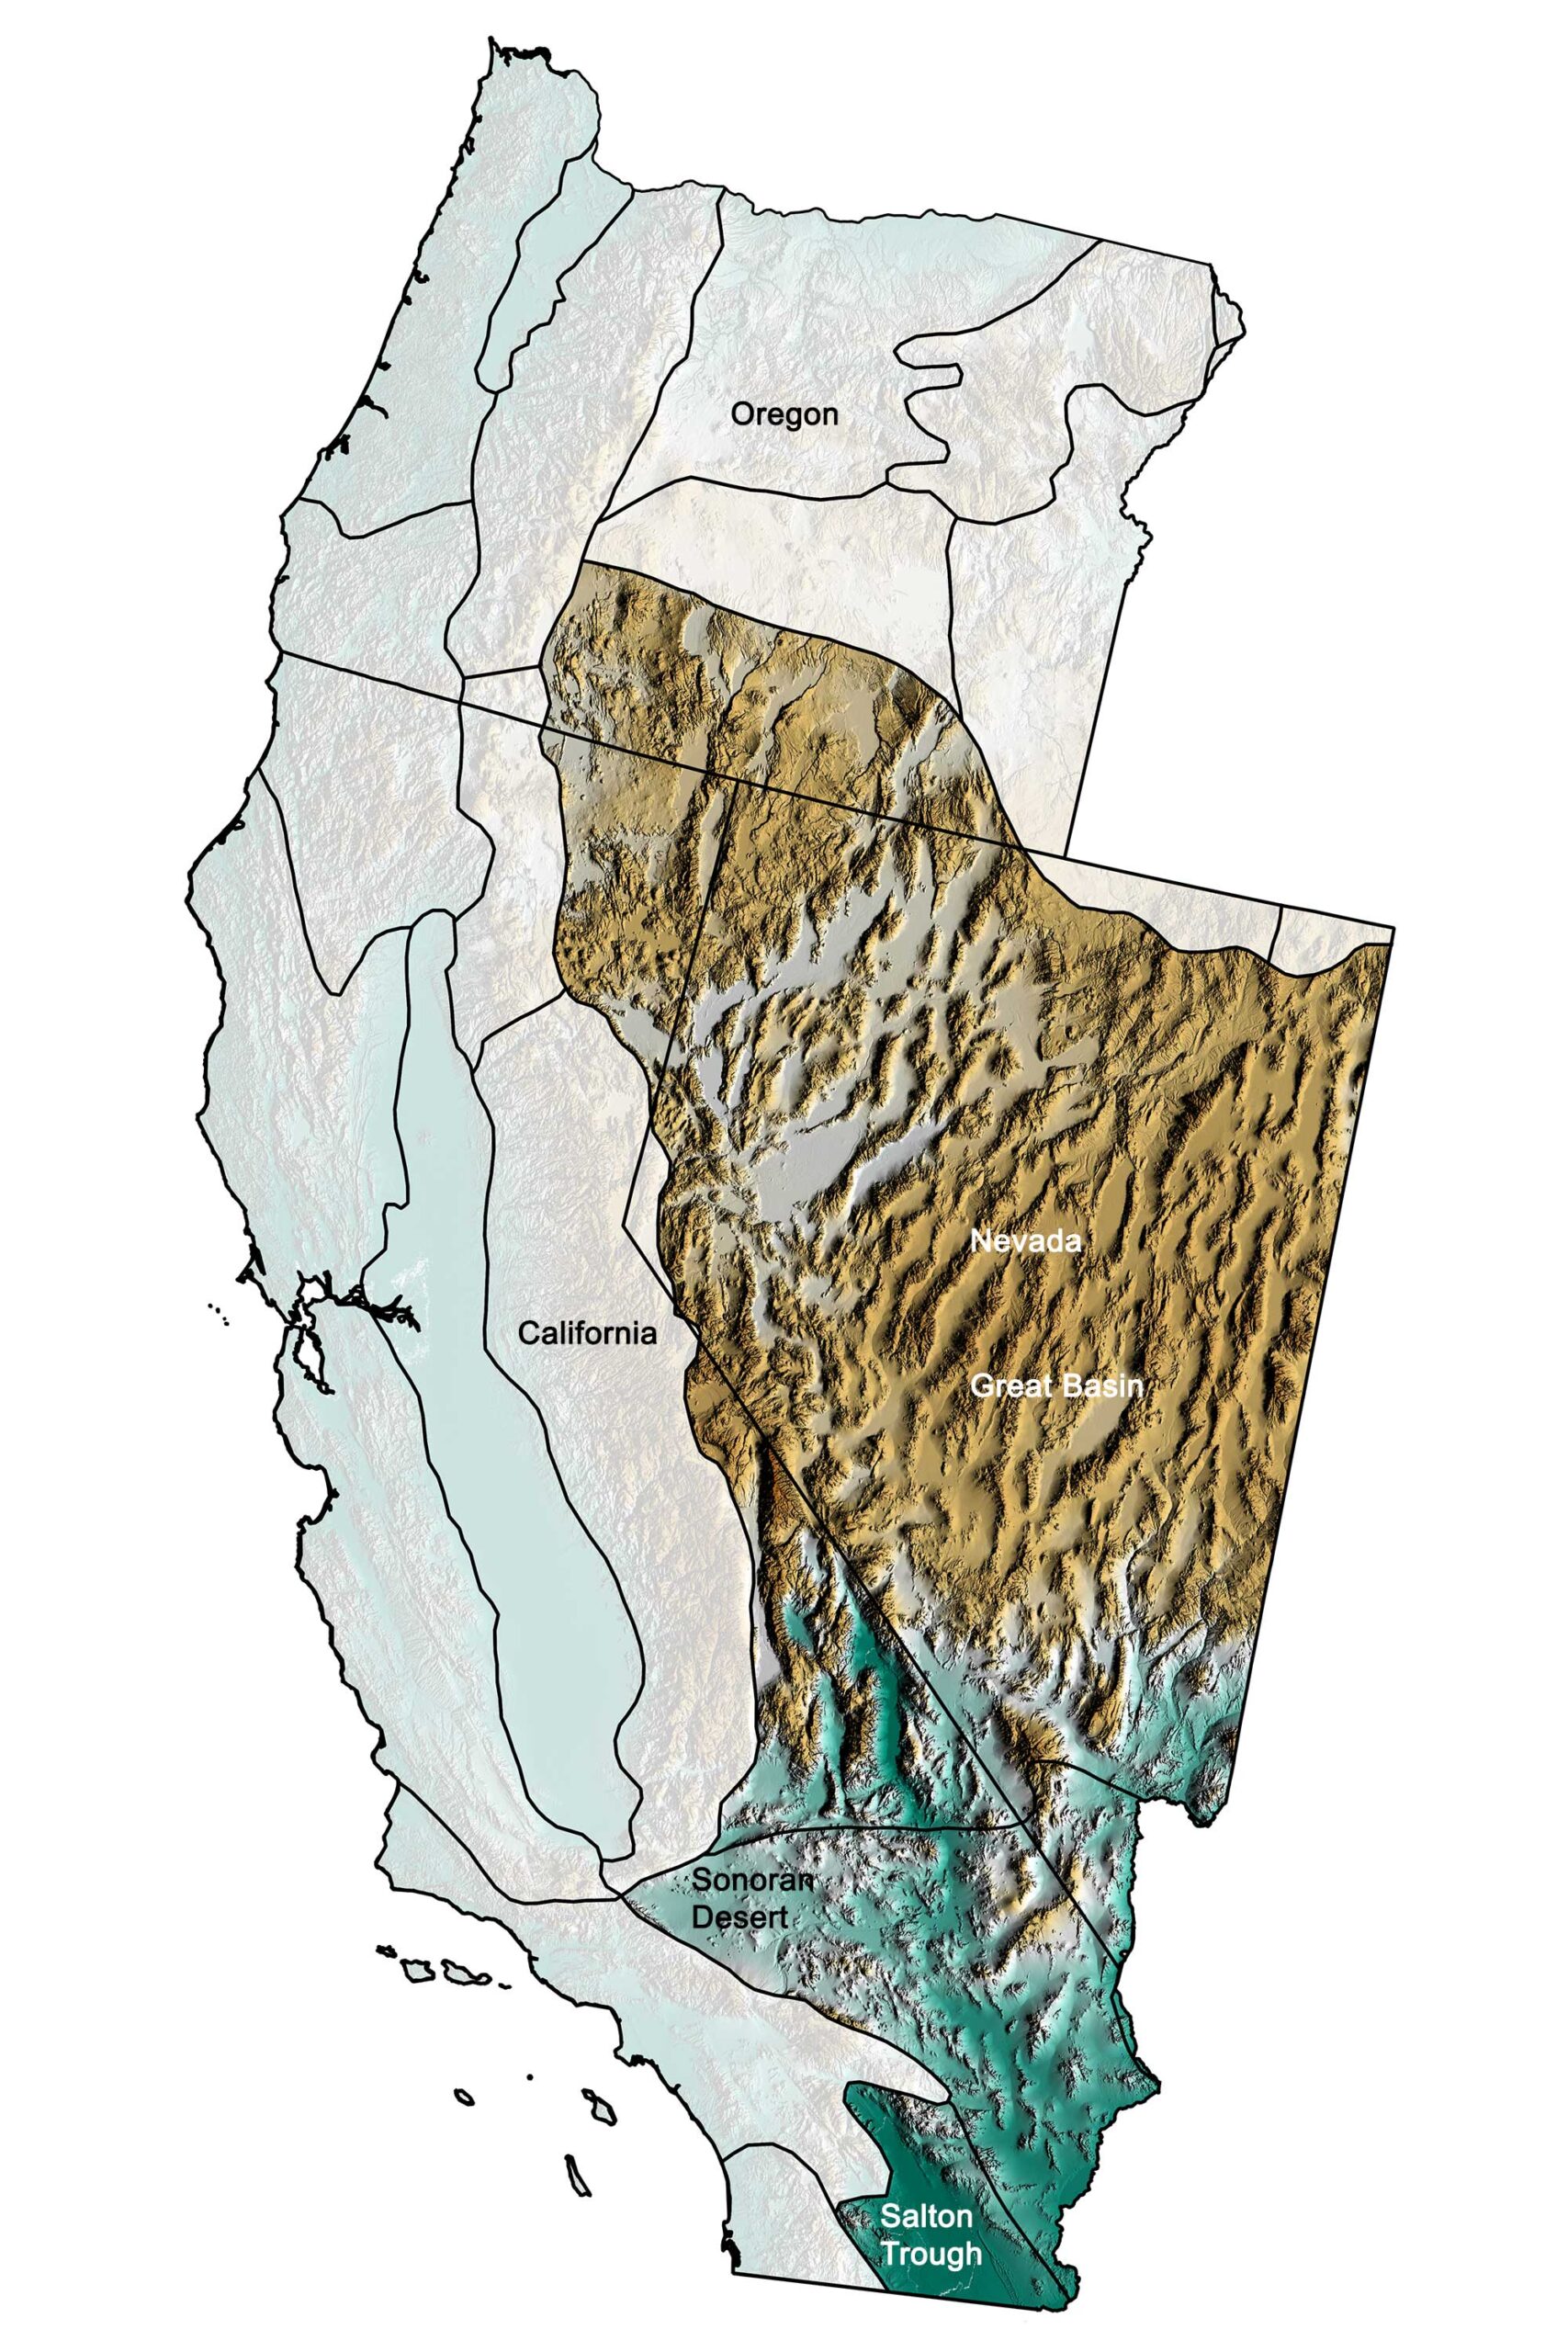 Topographic map of the Basin and Range region of the western United States.